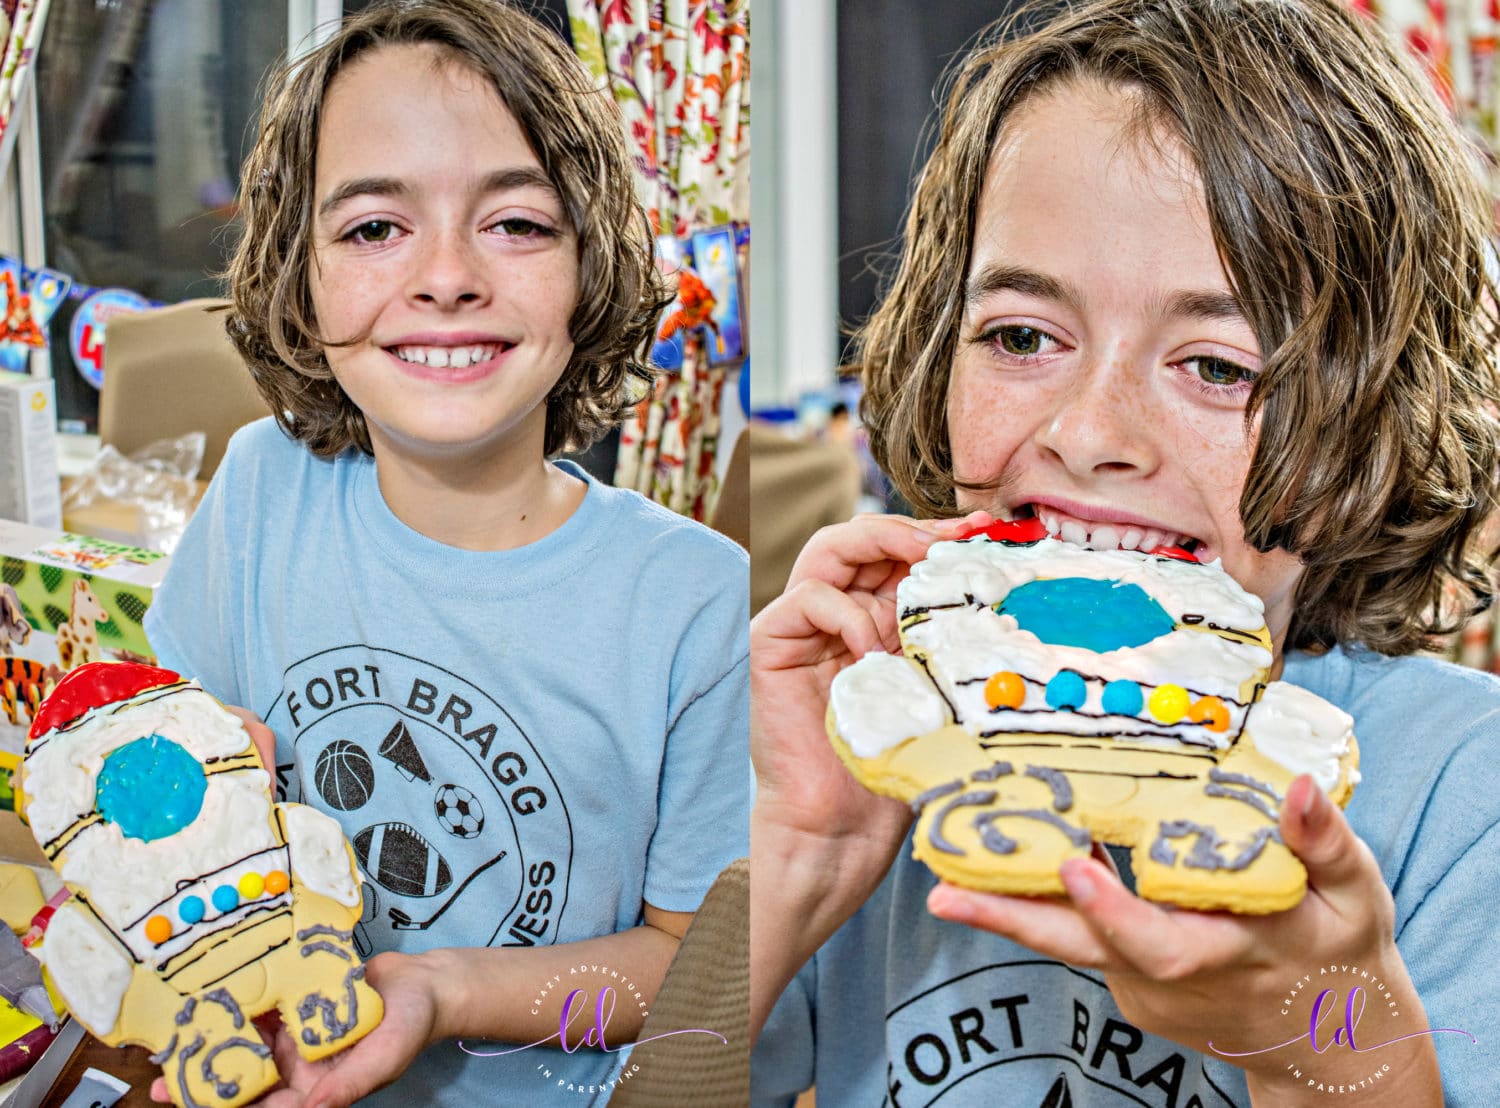 Baby Dude Enjoys Eating his decorated Wilton Cookie